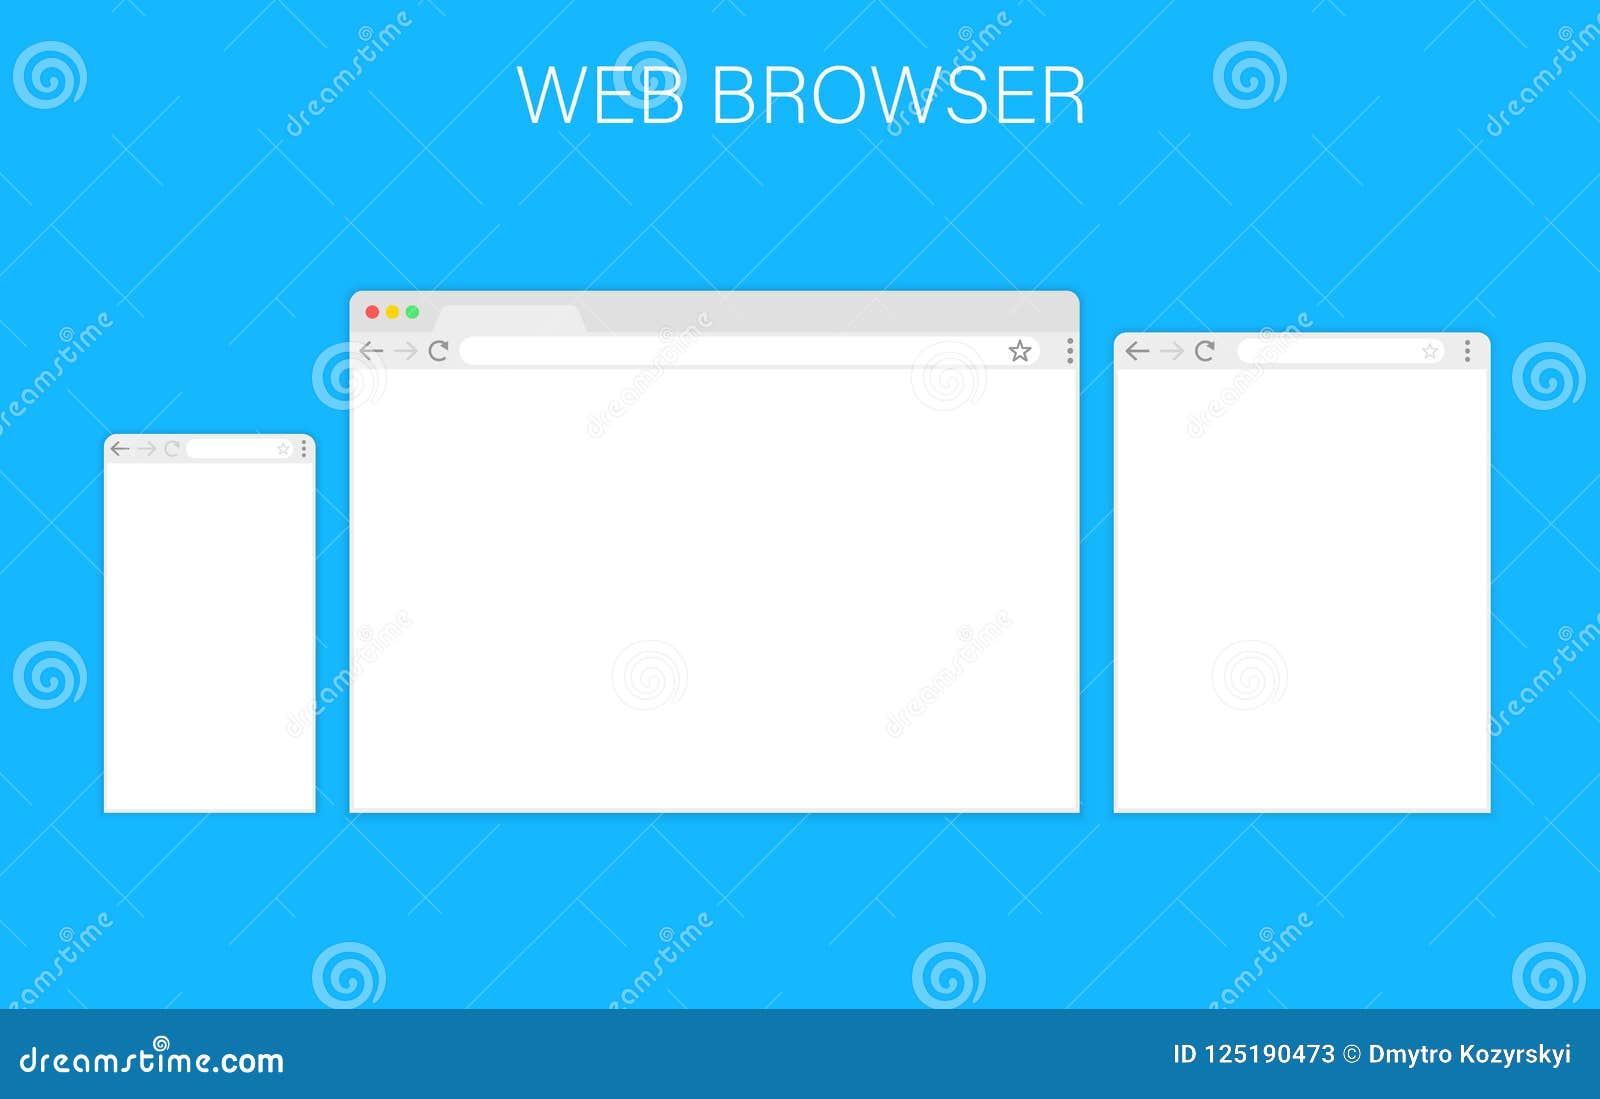 Browser Window Web Browser In Flat Style Window Concept Internet Browser Mockup Screen Design Vector Illustration Stock Vector Illustration Of Page Mockup